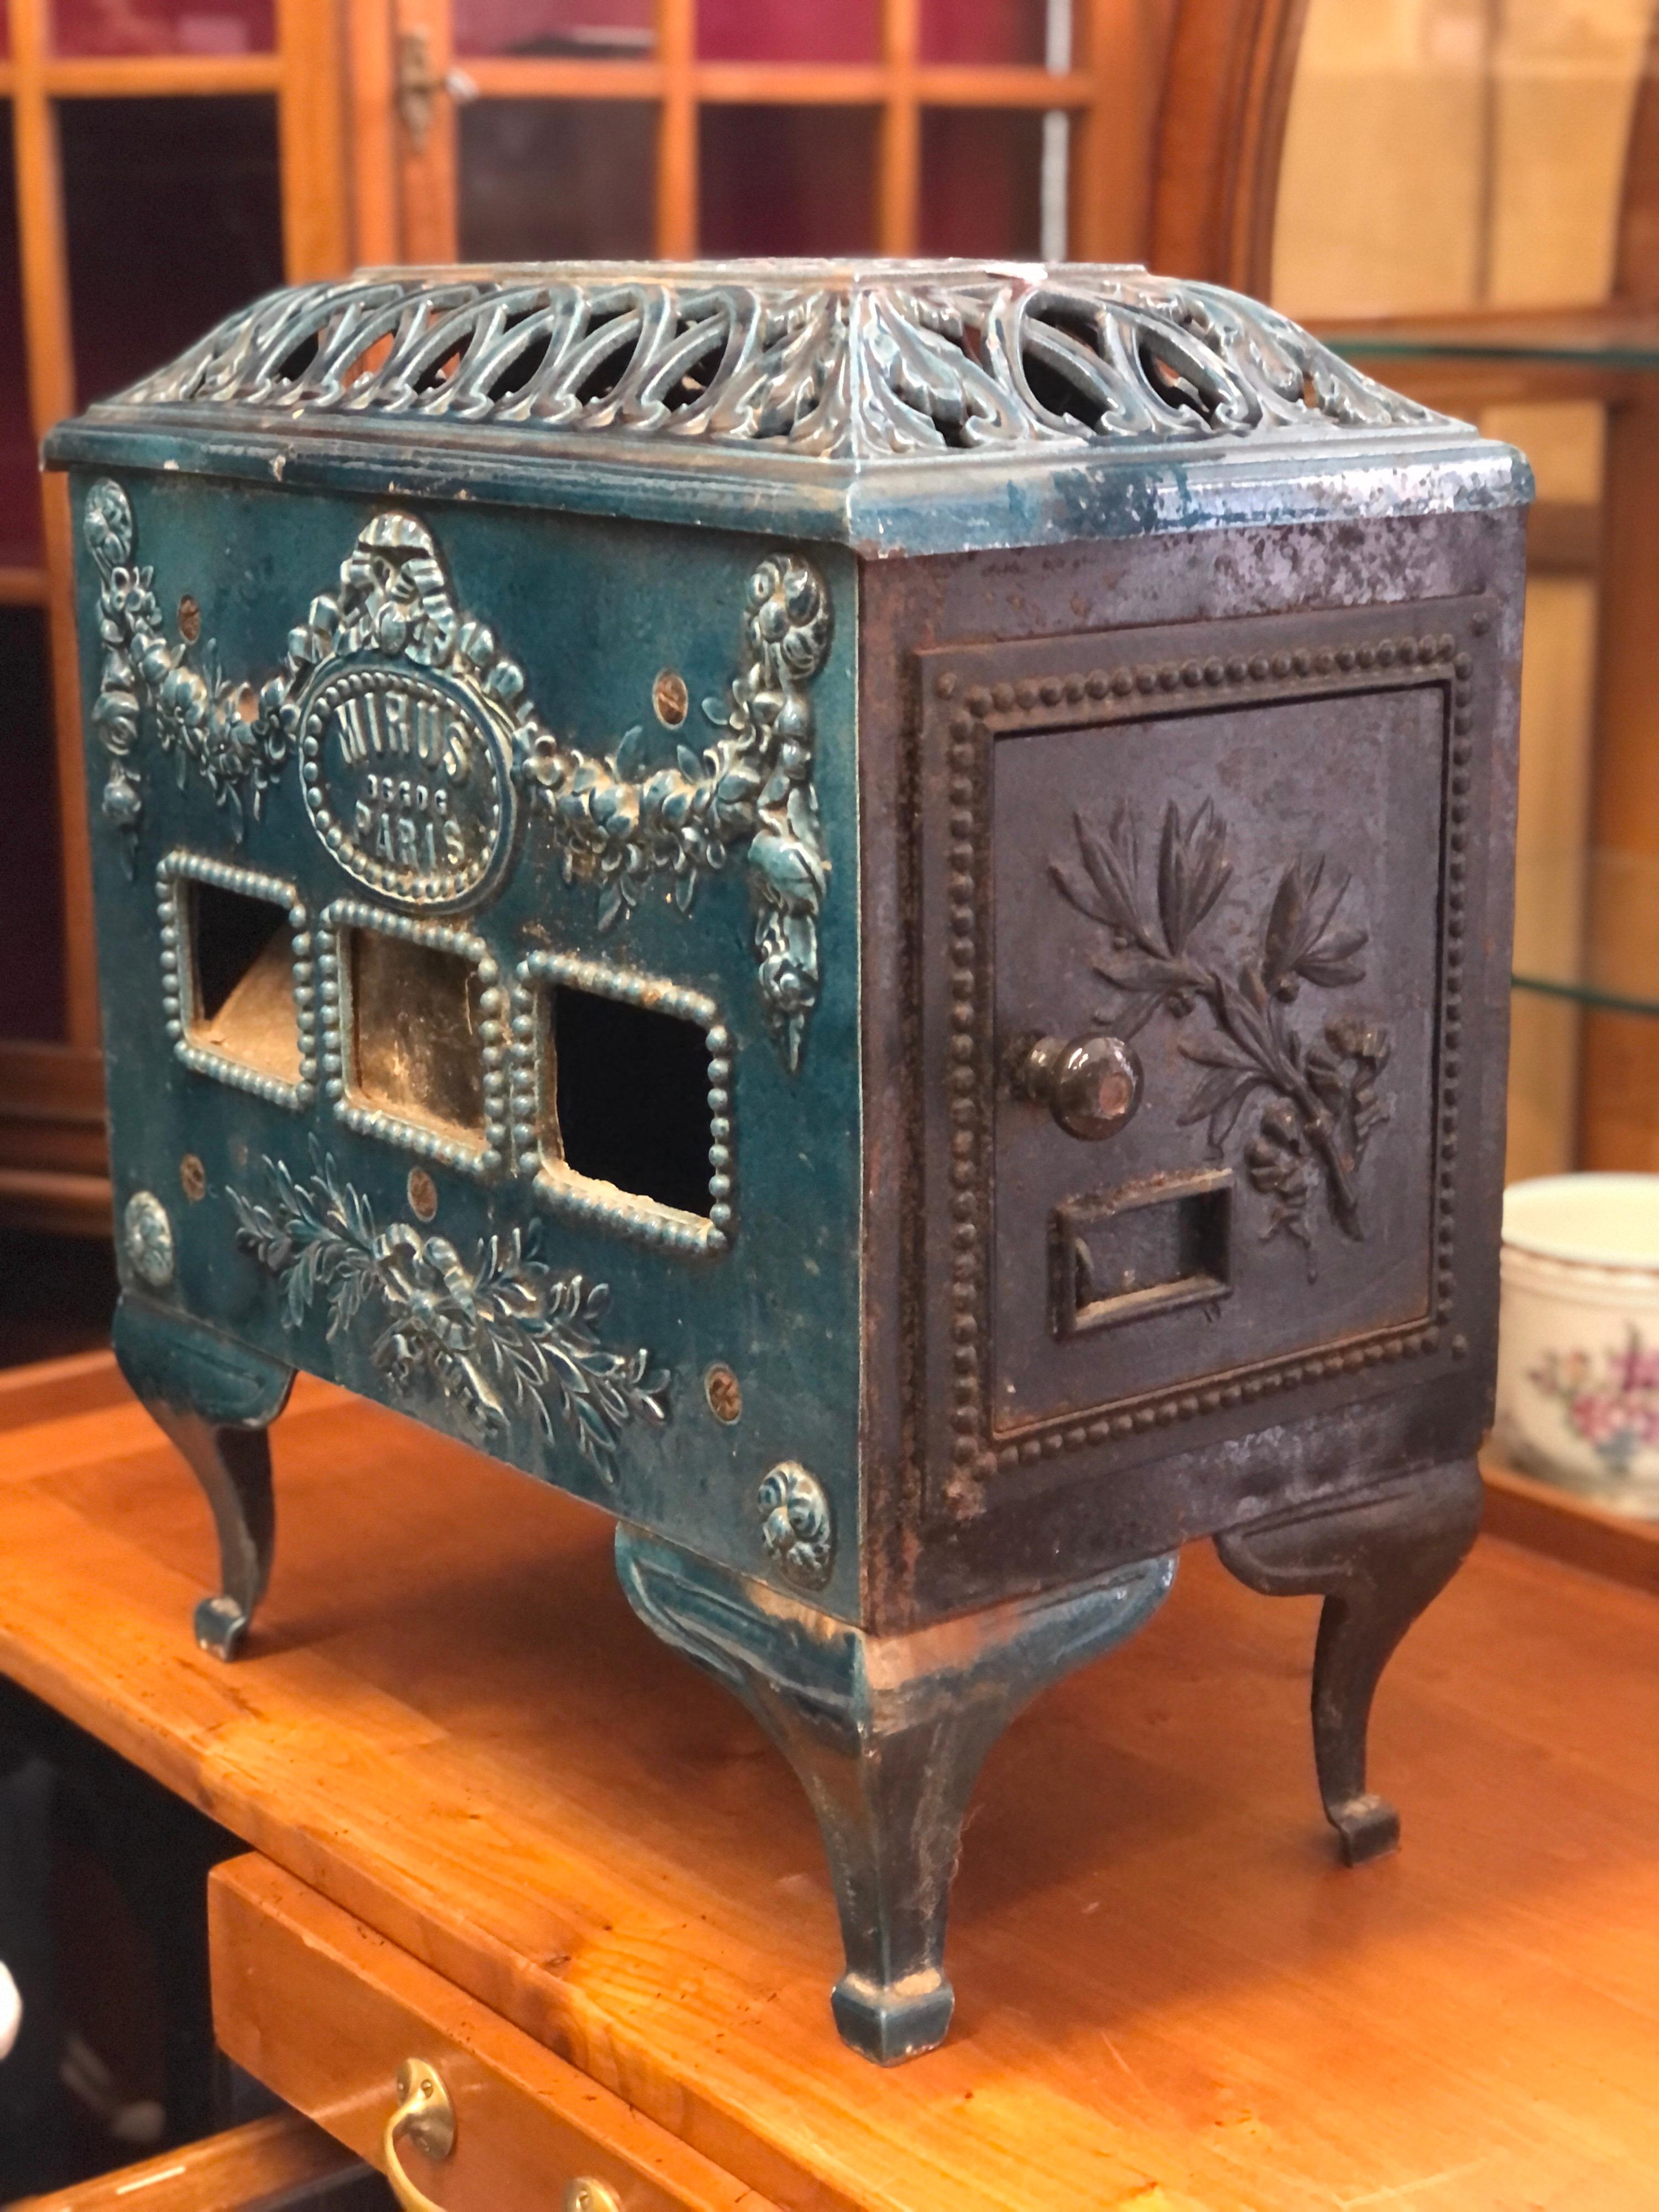 Beautiful blue ceramic stove MIRUS made in France, circa 1920.
The wood to be loaded from side door and fire to be seen from three small front windows.
The piece is richly decorated with floral elements.
  